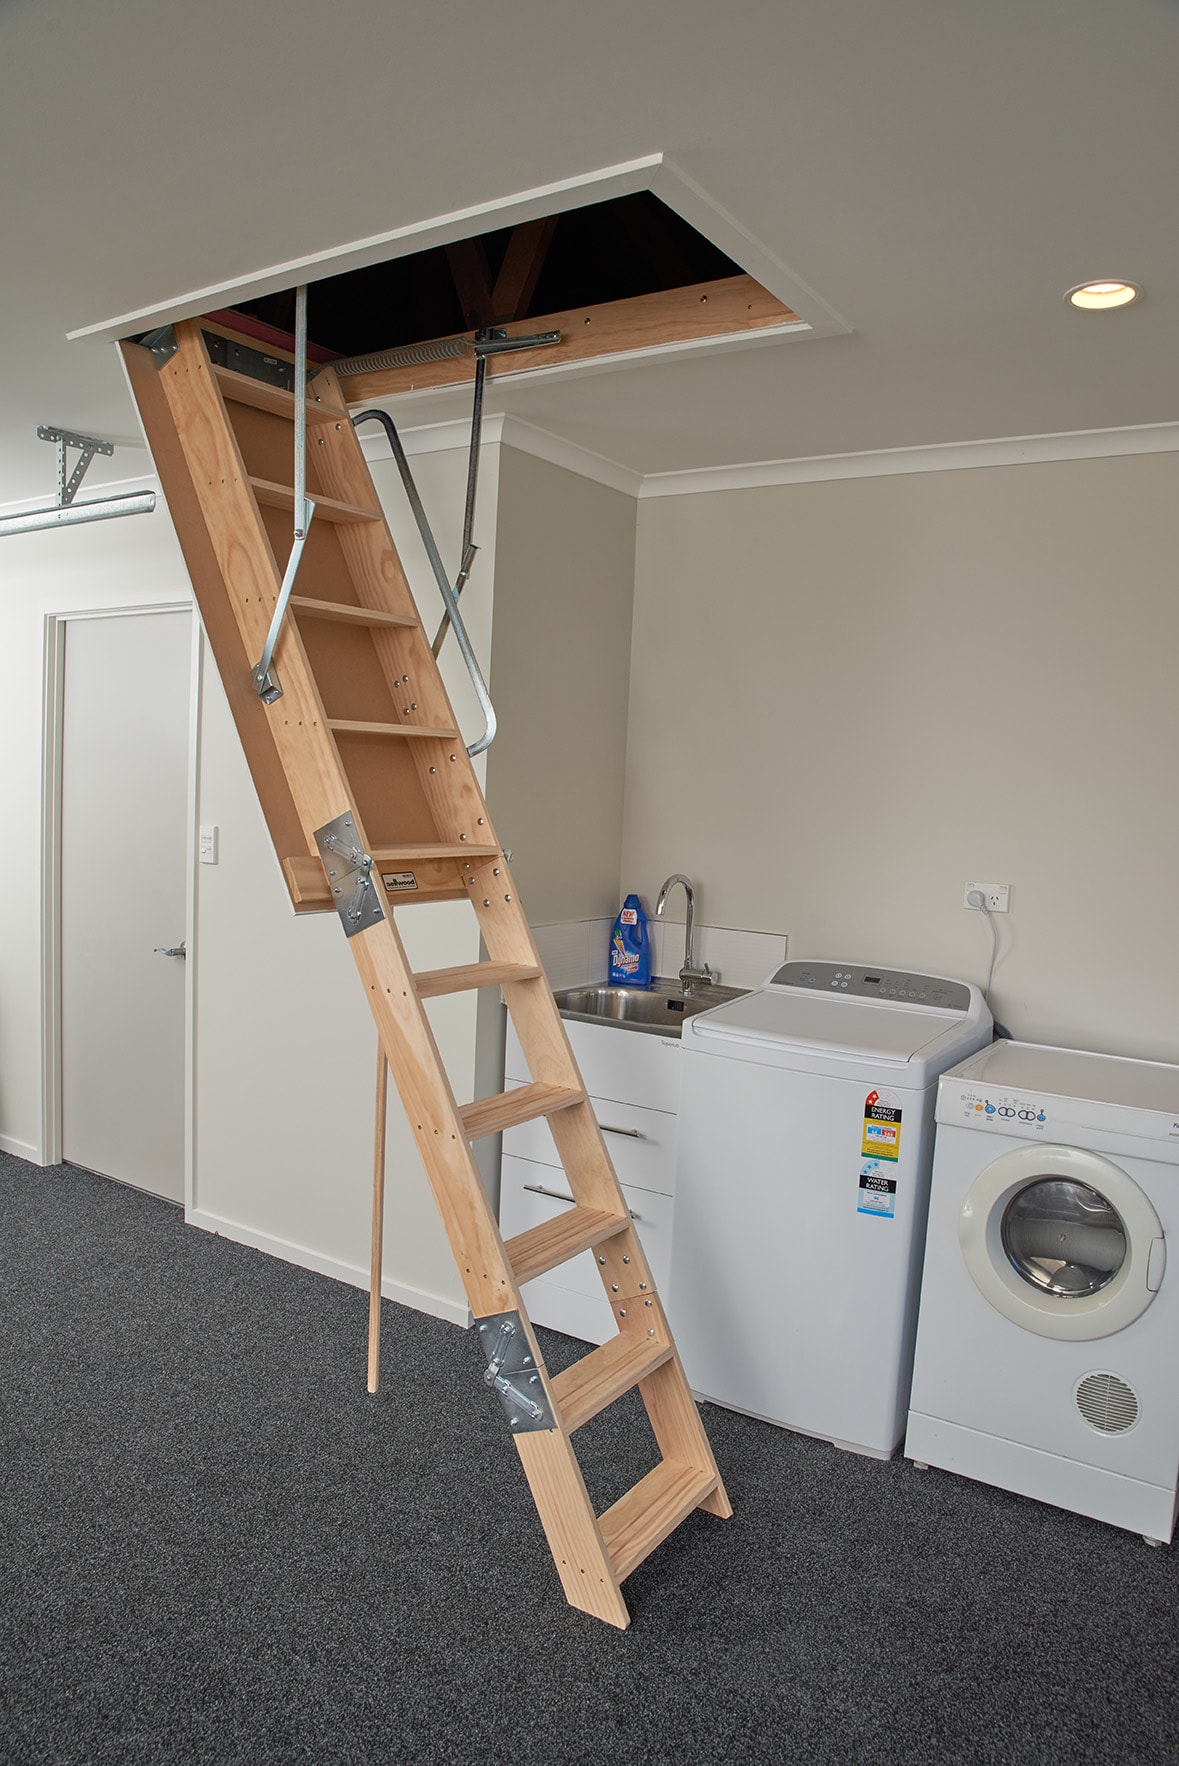 Wood Attic Ladder Installation, How To Install A Drop Down Ceiling Ladder